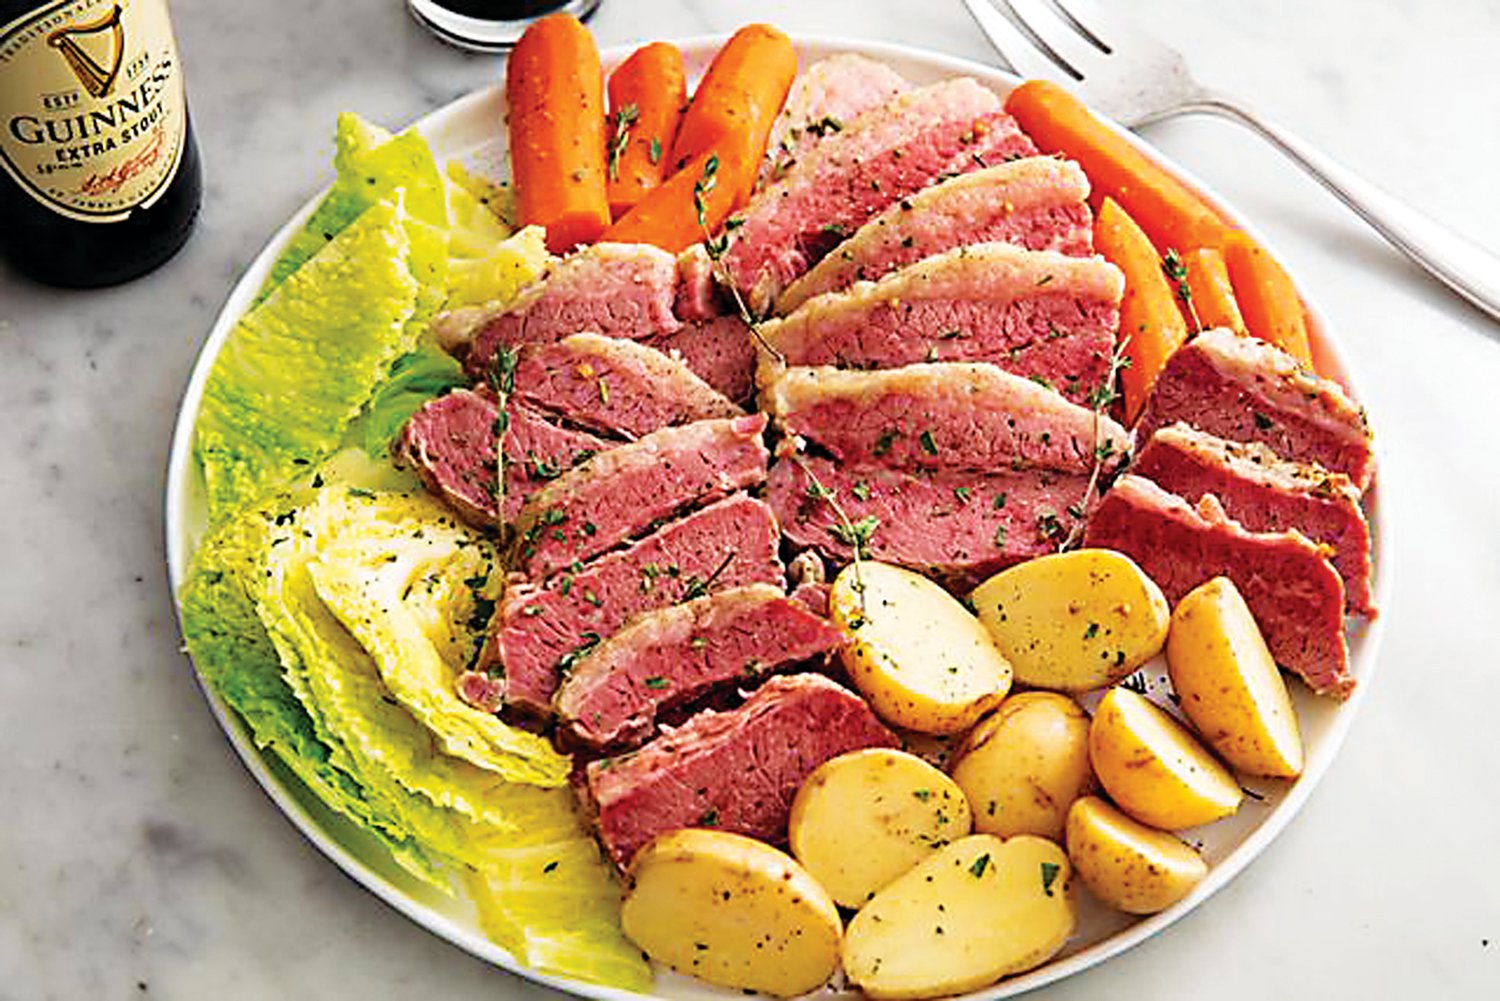 Corned beef and cabbage is a traditional dish for St. Patrick’s Day celebrations here in the U.S. Photograph by Delish.com